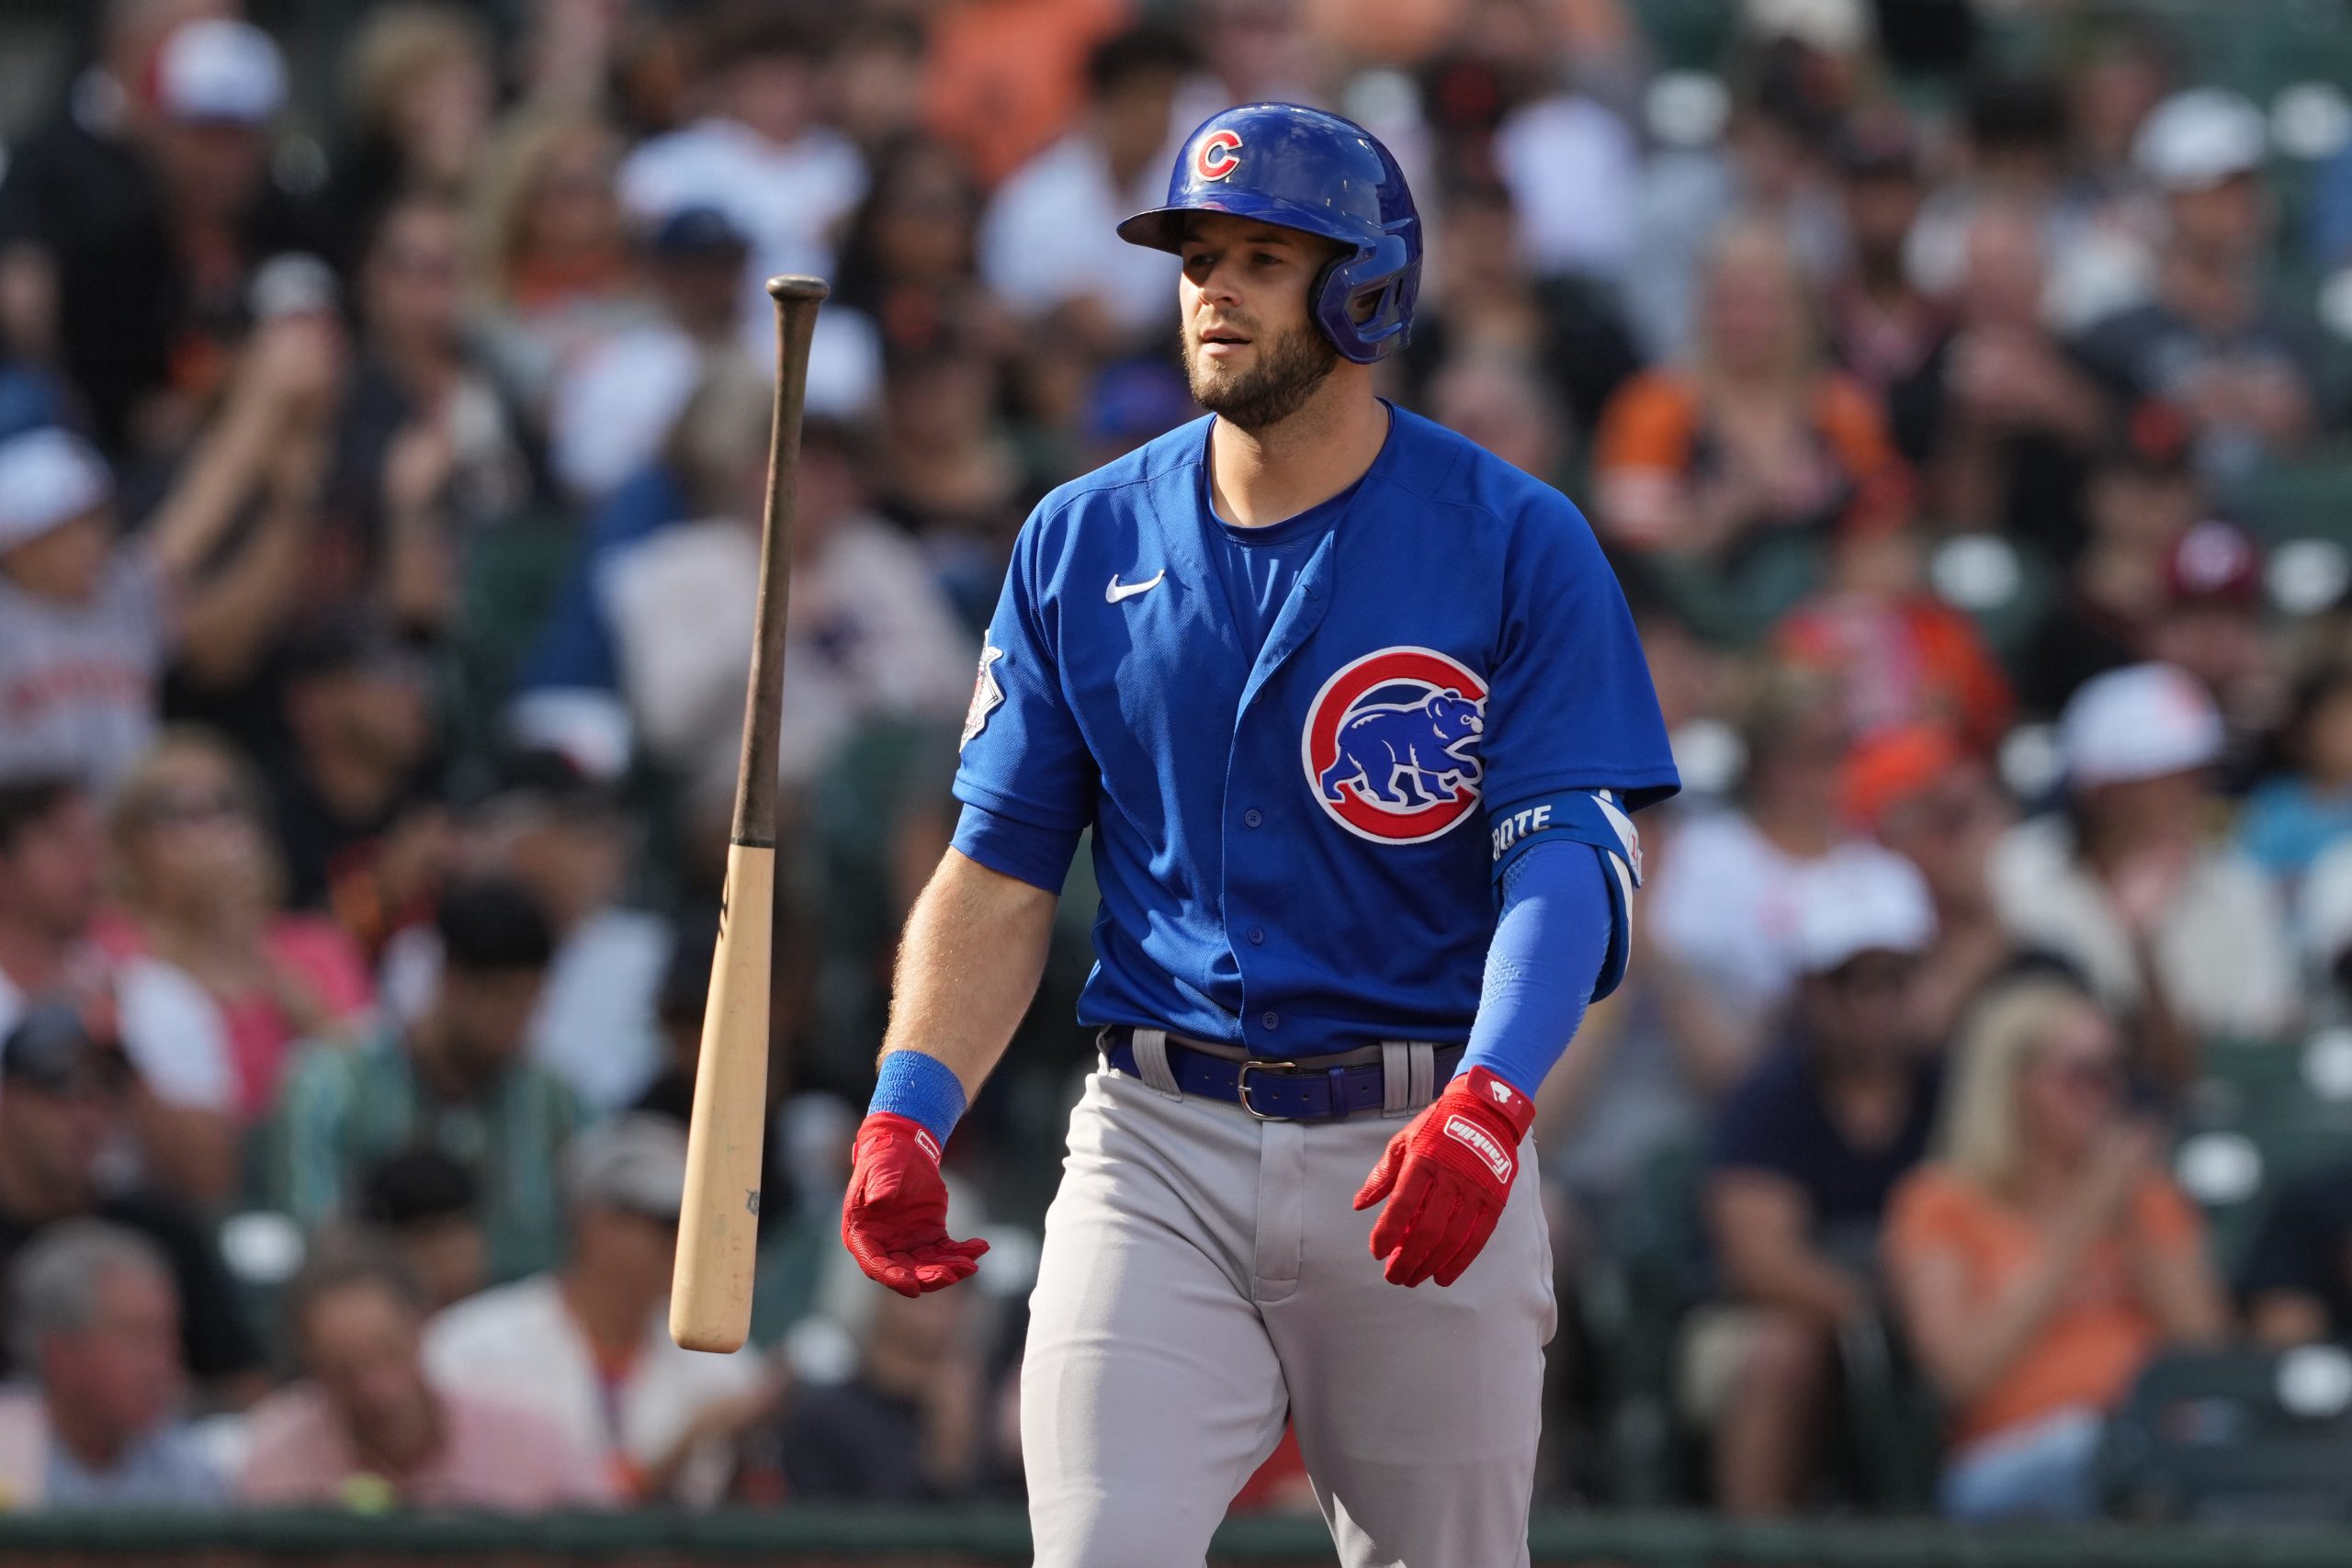 Betting on the Chicago Cubs